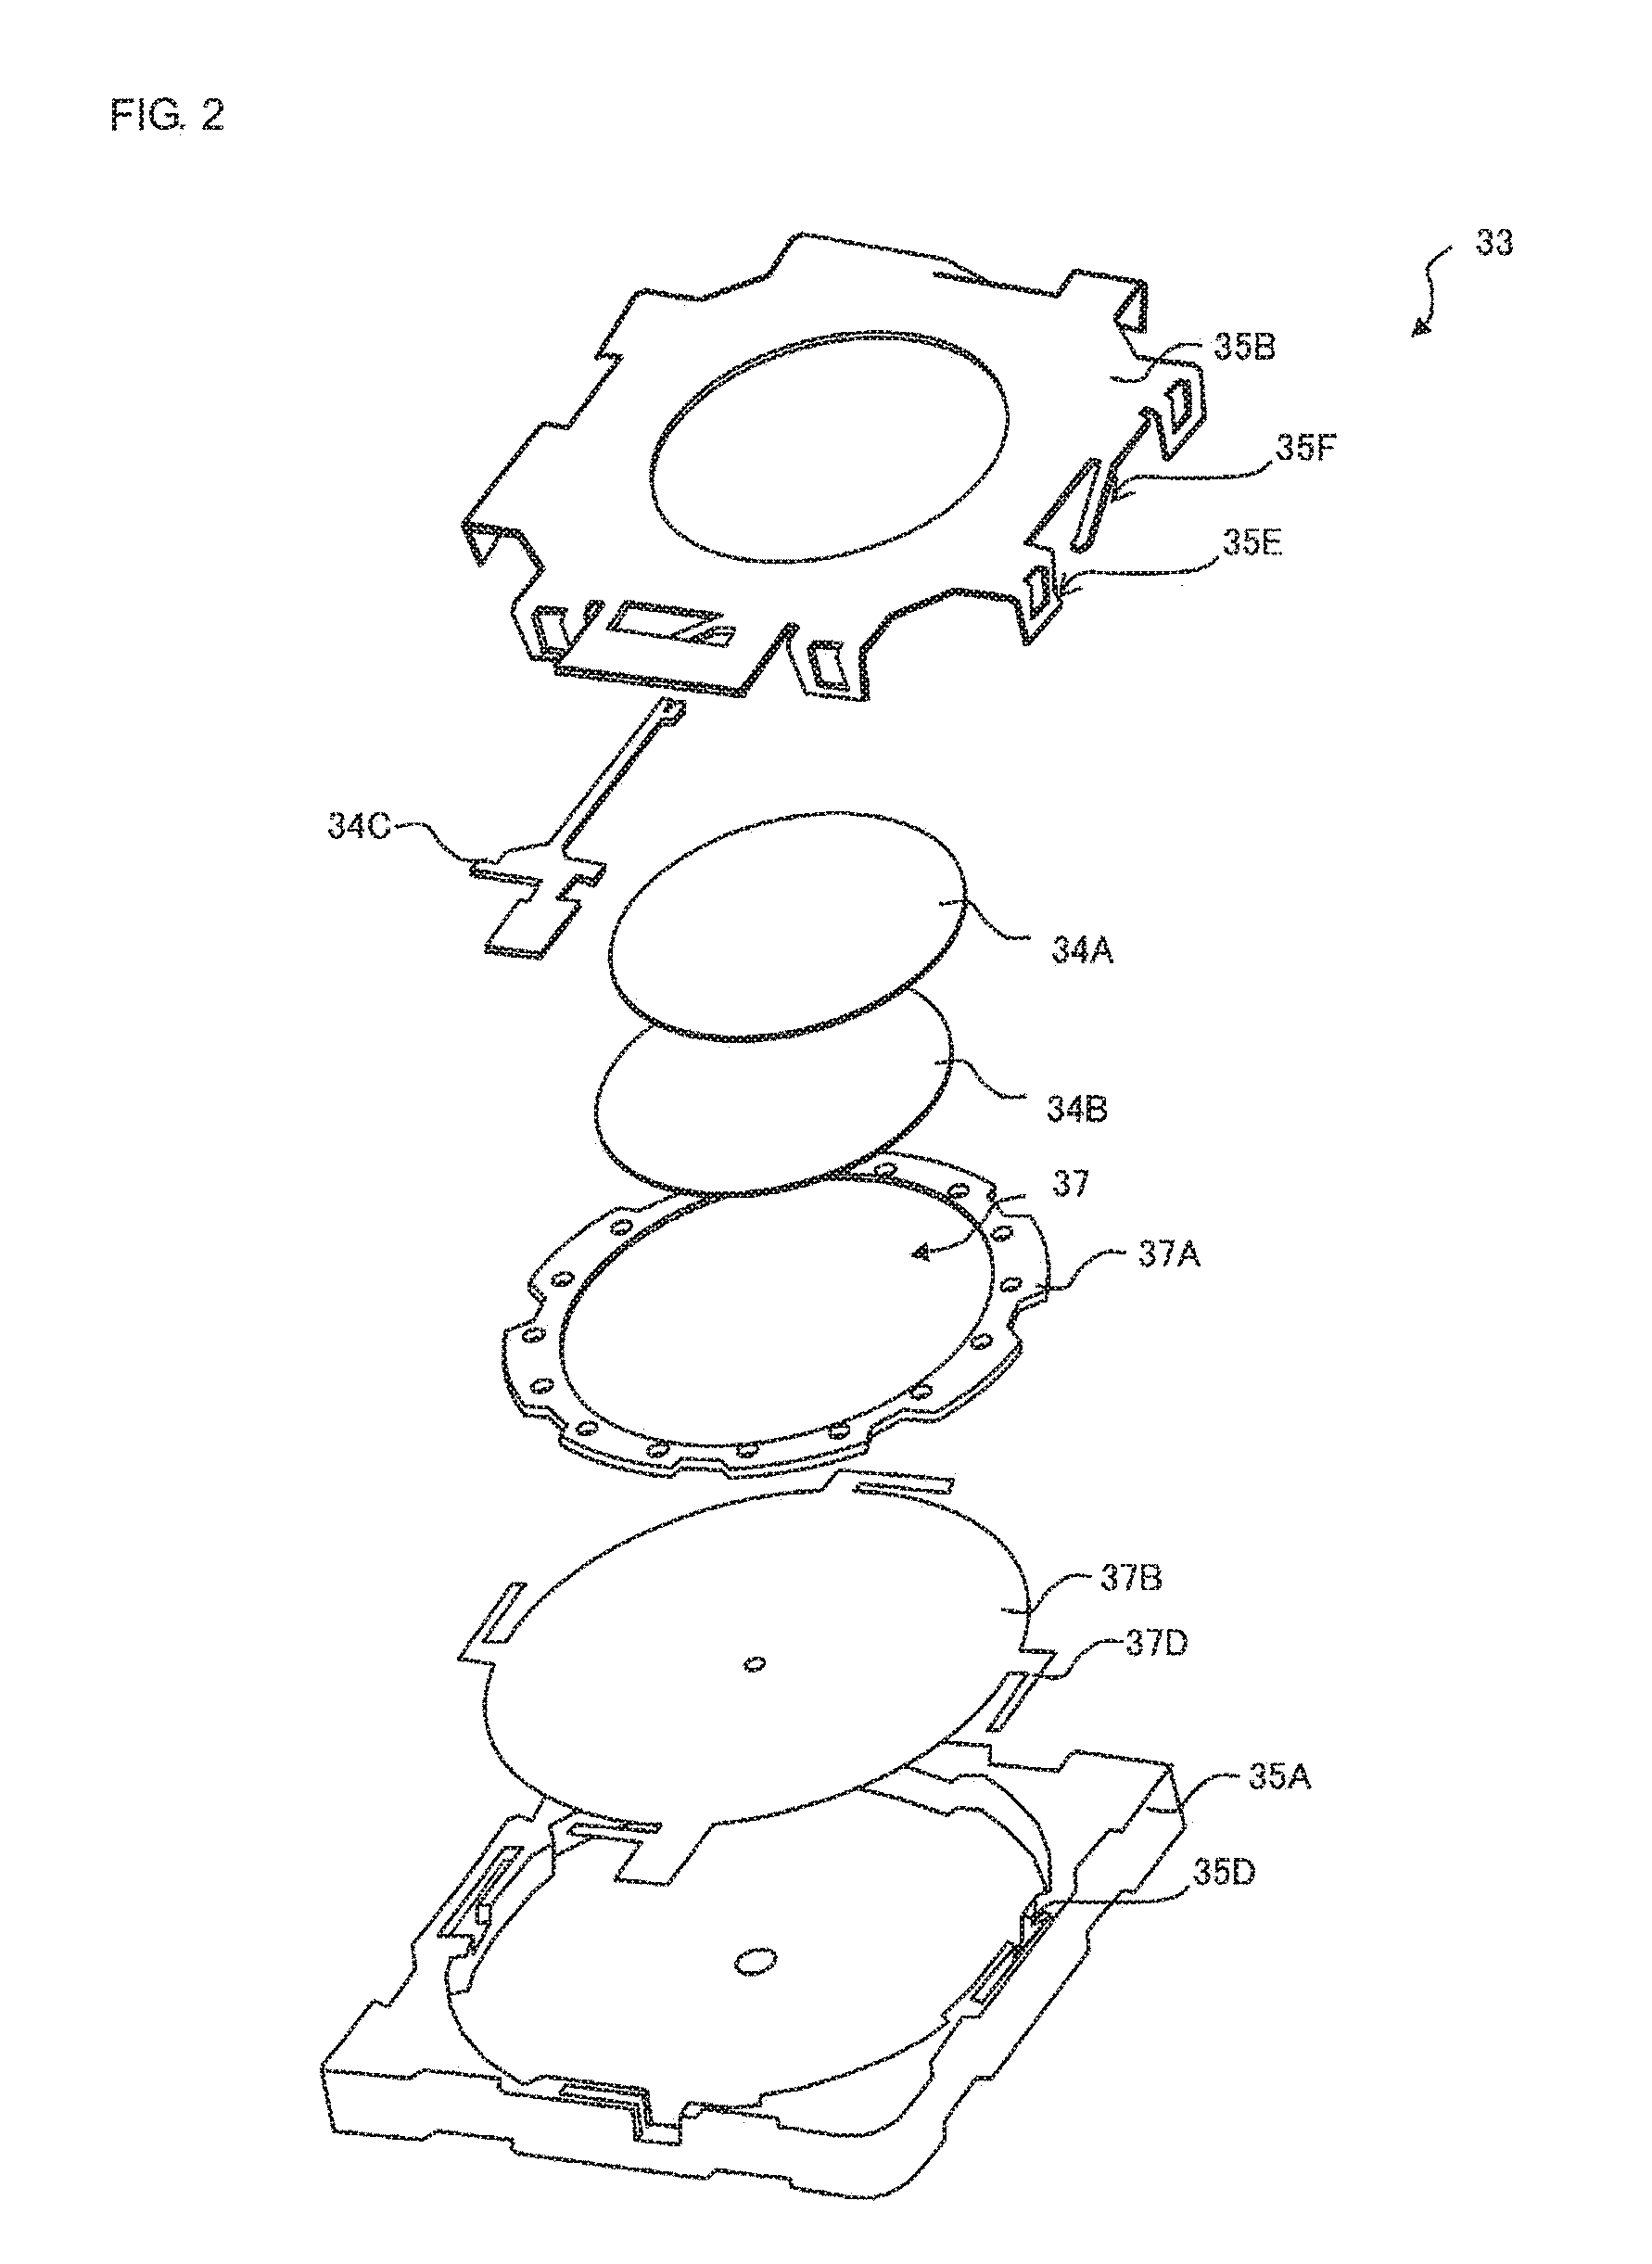 Suction device